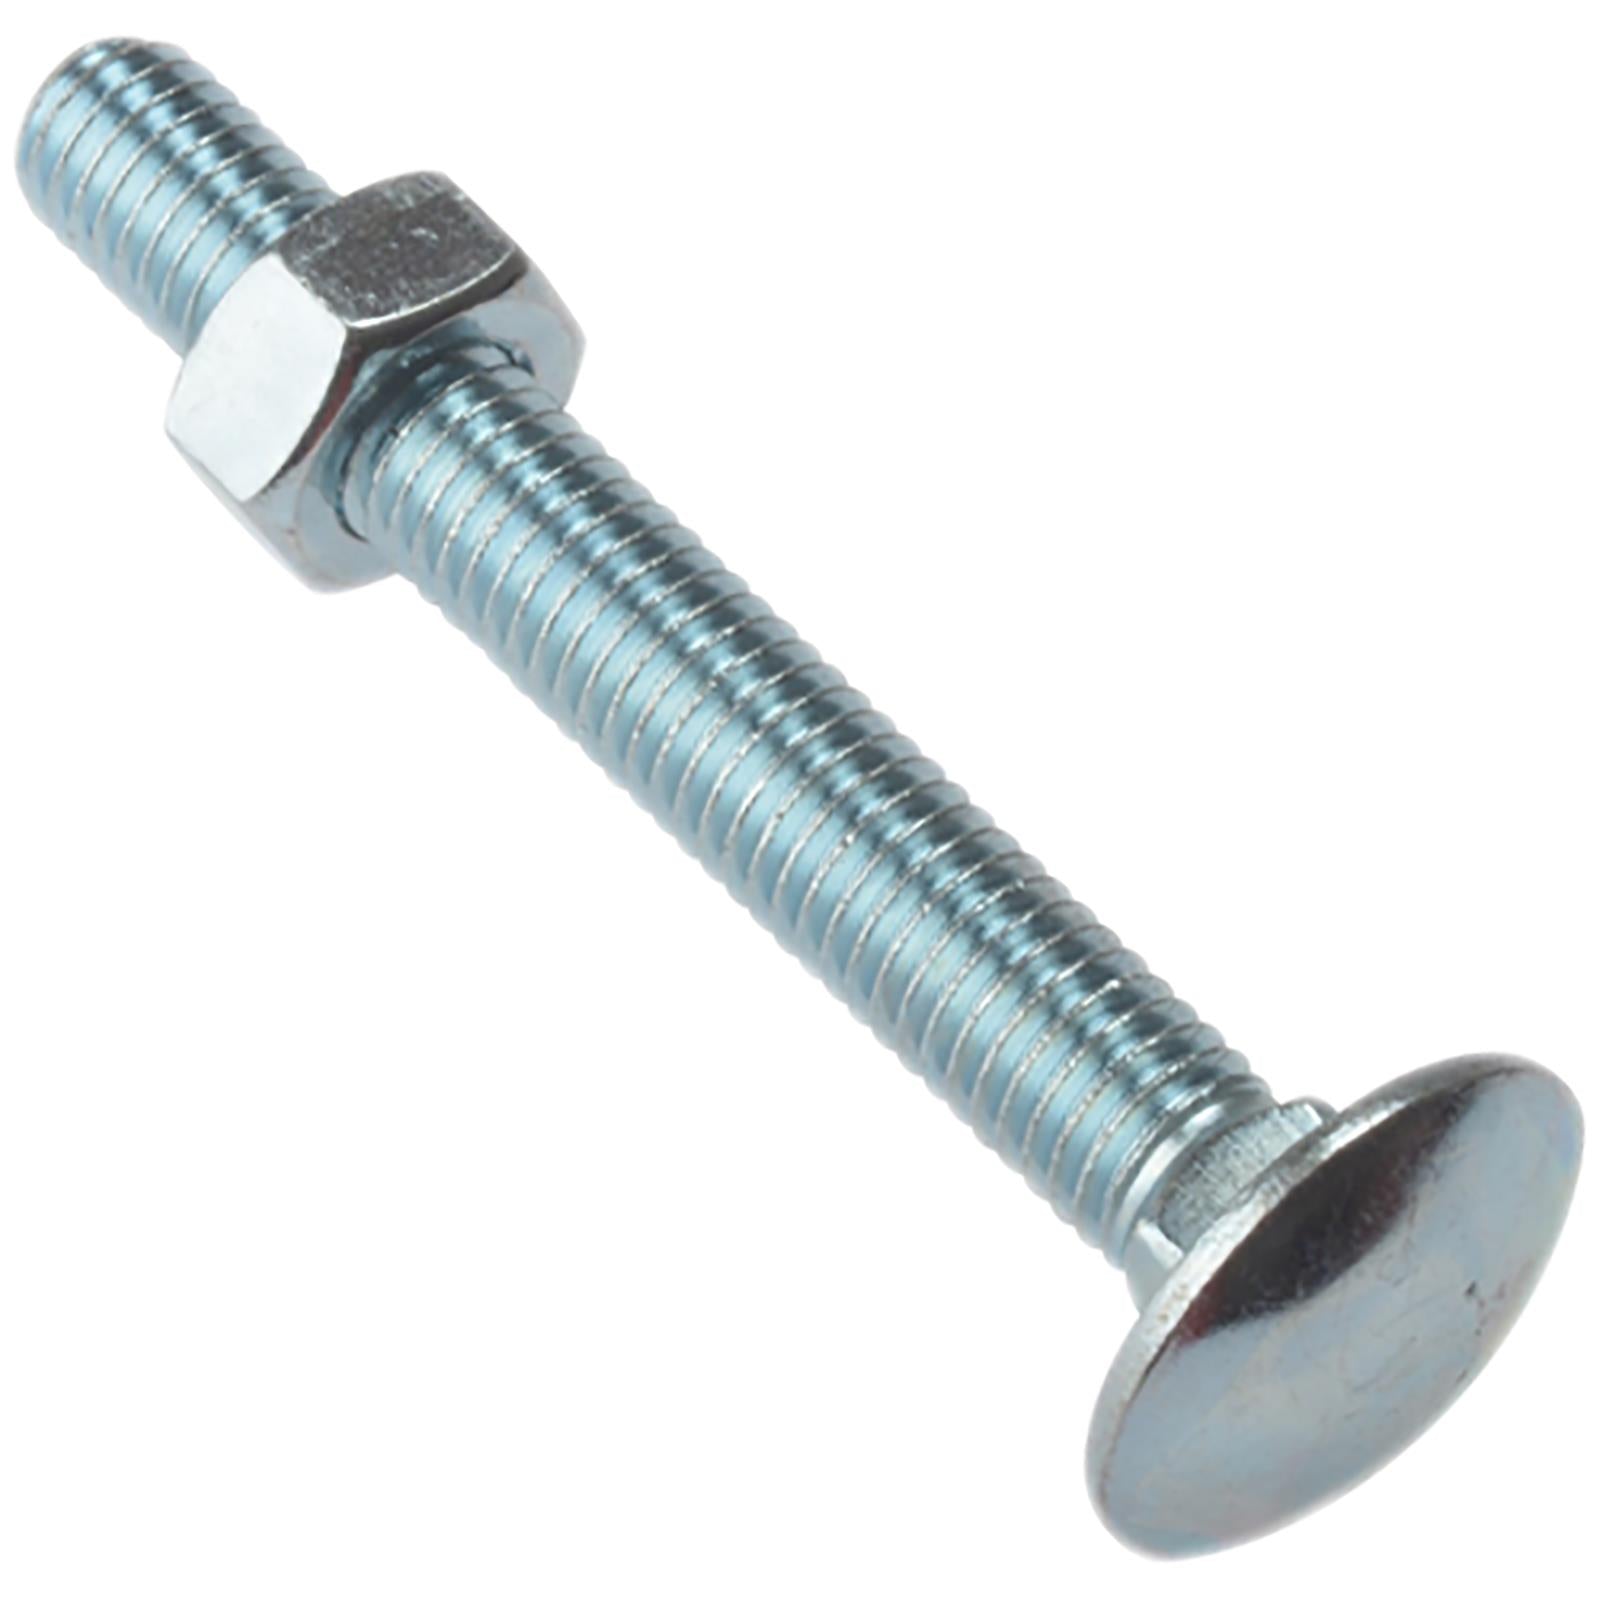 ForgeFix Carriage Bolts with Hex Nuts Zinc Plated M6-M12 Bagged